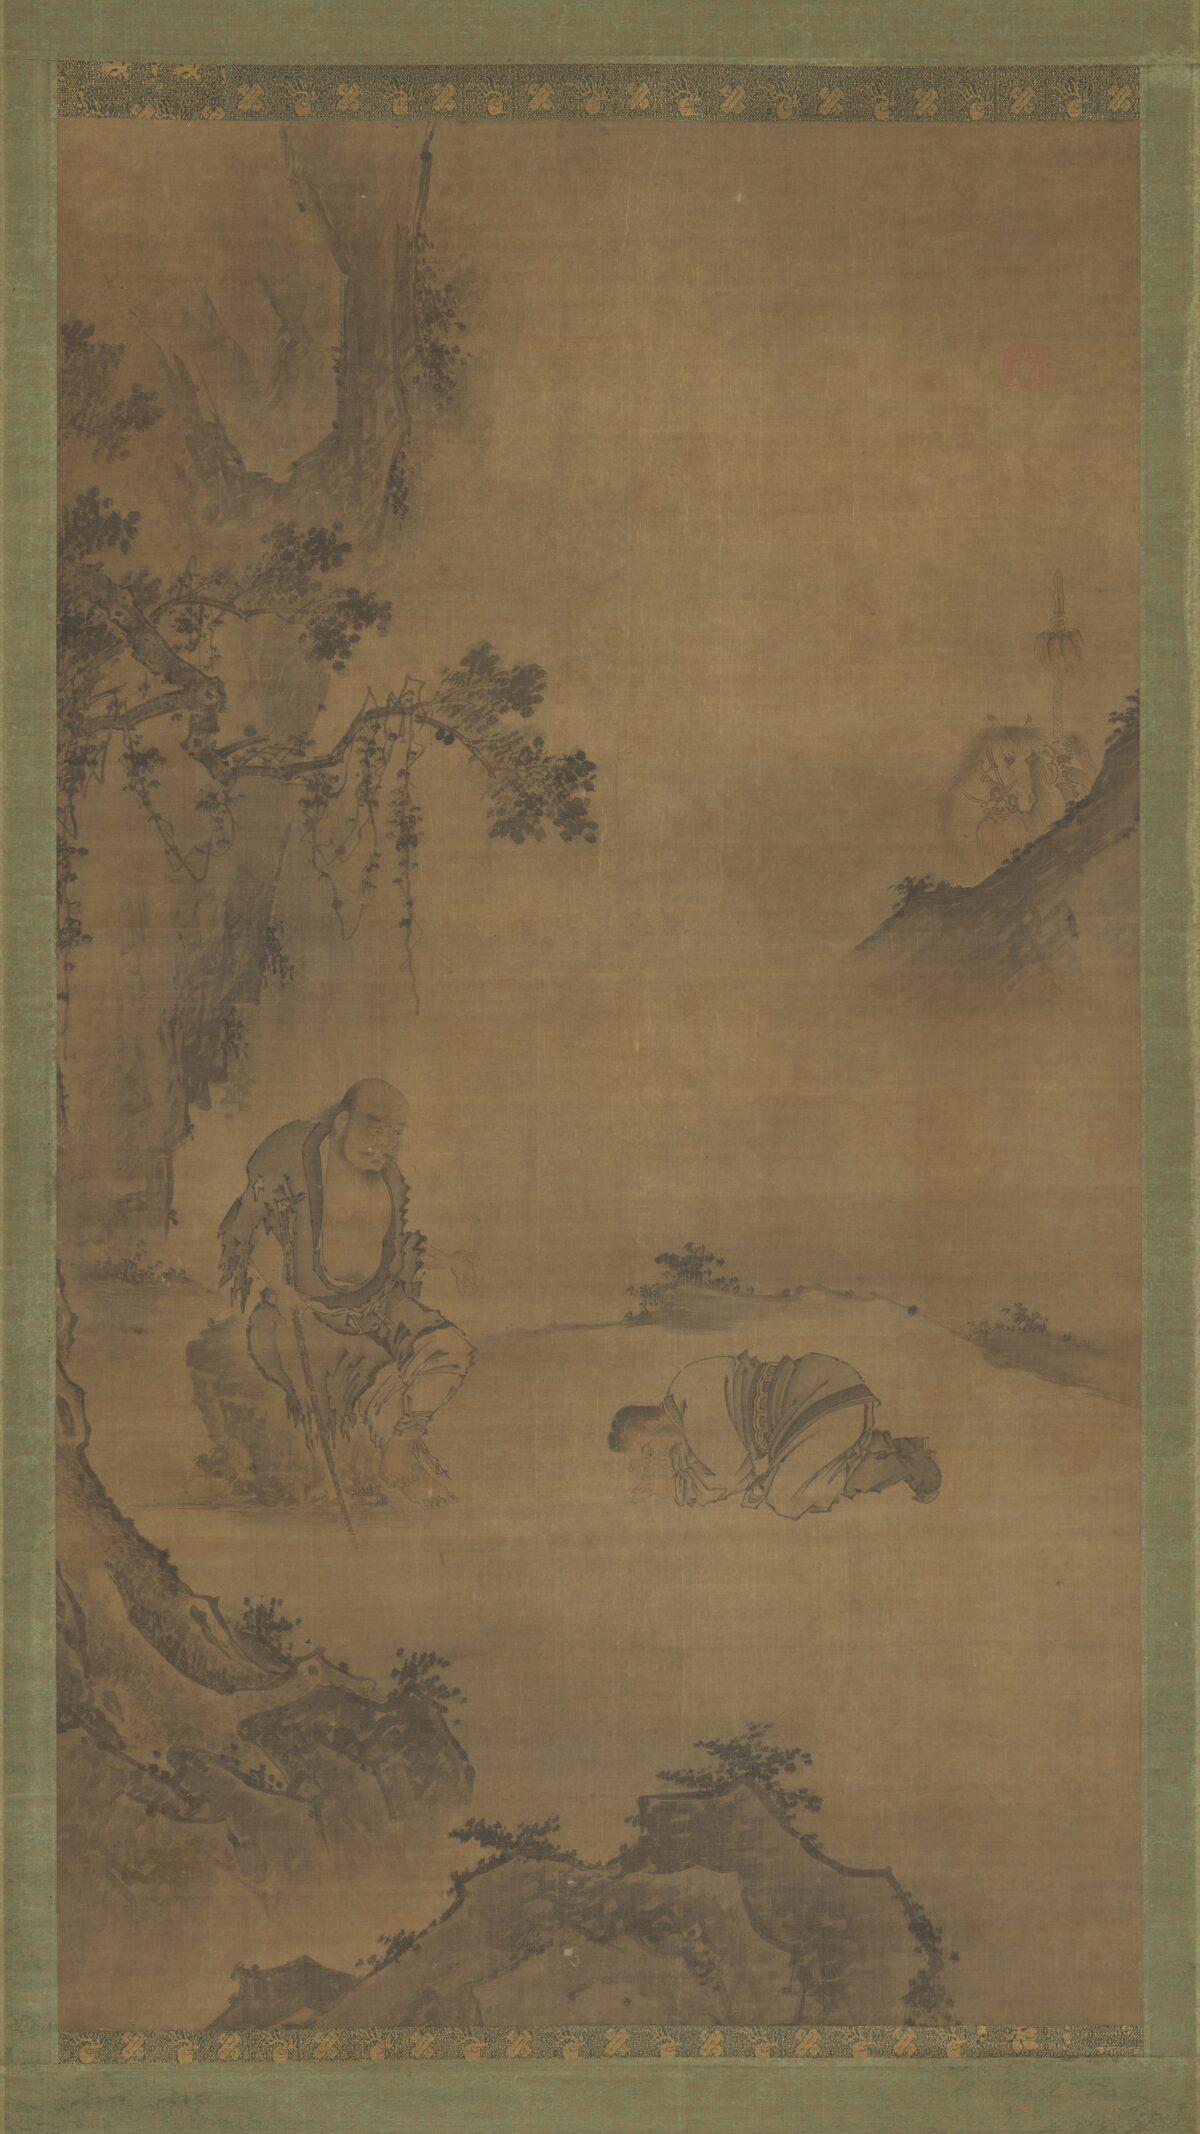 “Daoist Immortal Li Tieguai Receiving a Visitor,” Ming Dynasty (1368–1644), by an unidentified artist. Hanging scroll; ink and color on silk. Purchase, Friends of Asian Art Gifts, 2016; The Metropolitan Museum of Art. (Public Domain)